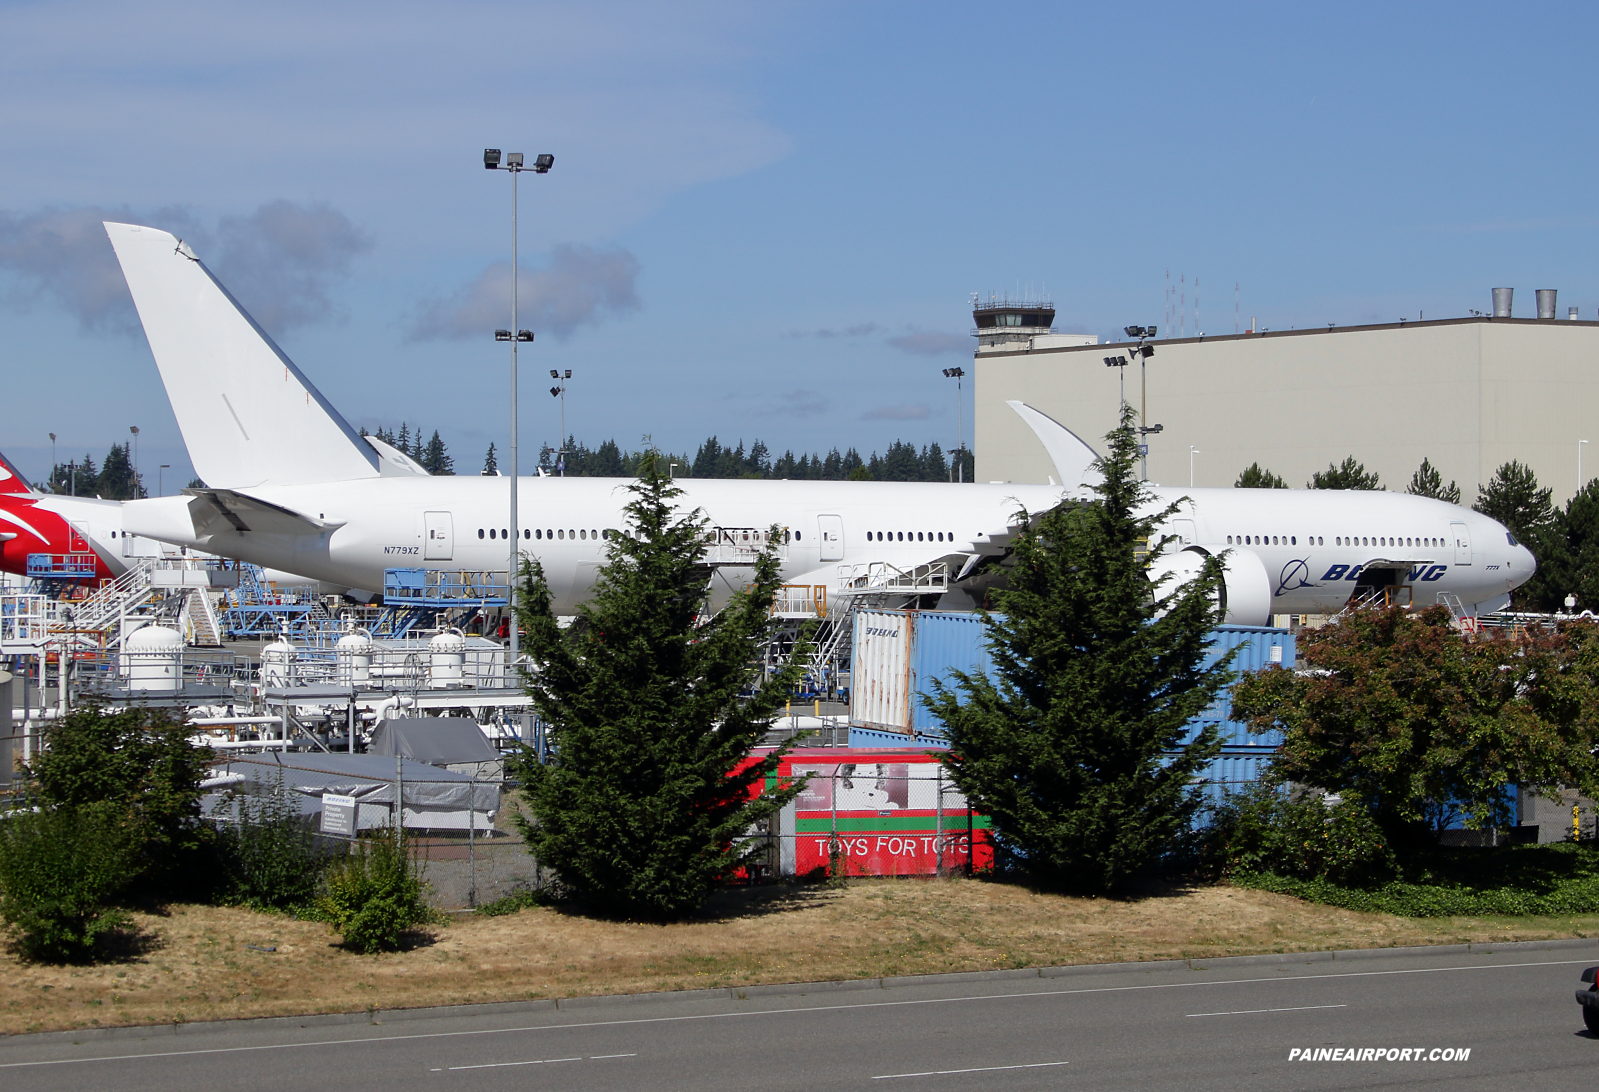 777-9 N779XZ at KPAE Paine Field